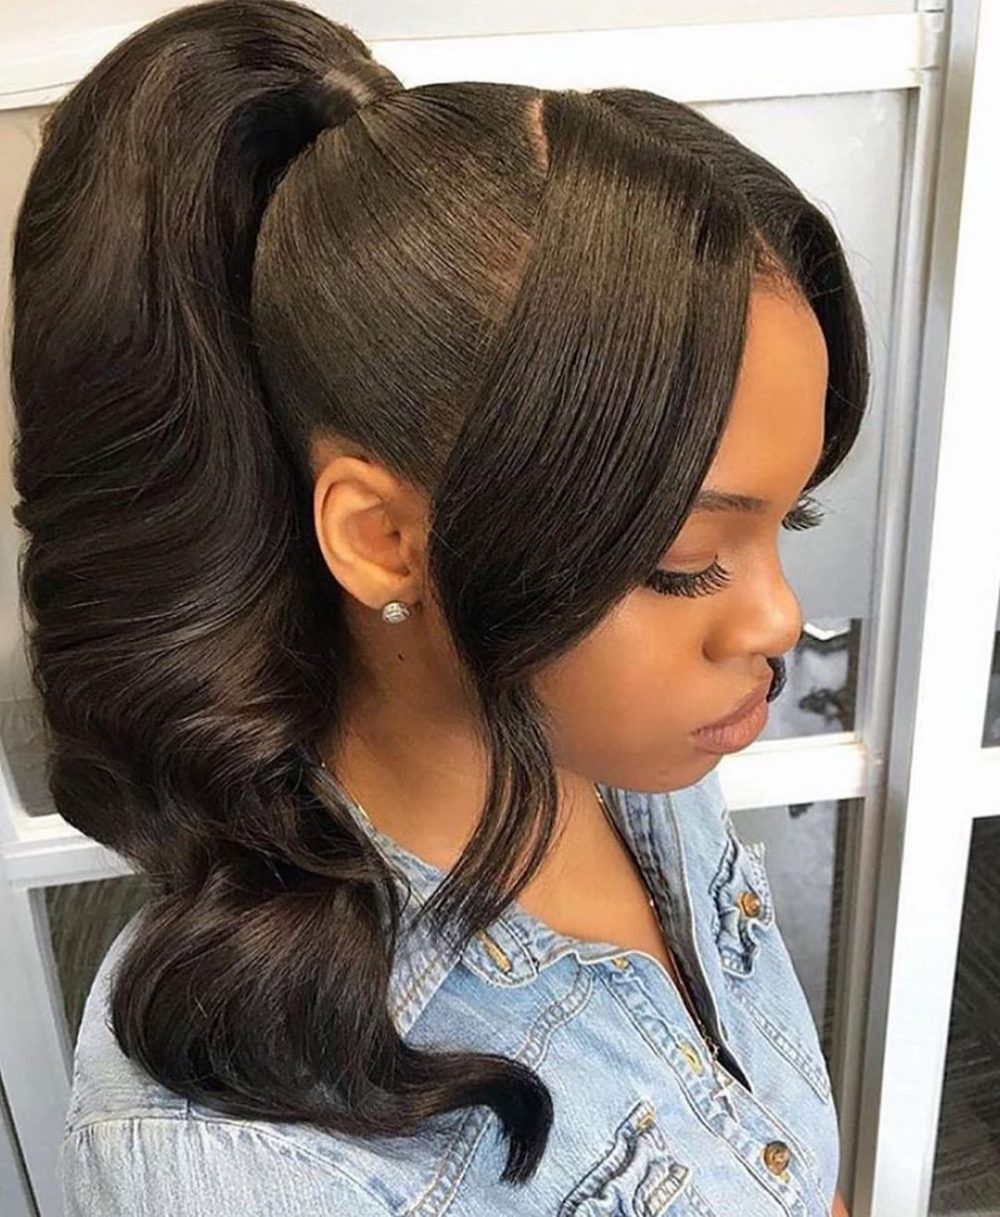 Ponytail style created with sew-in hair extensions